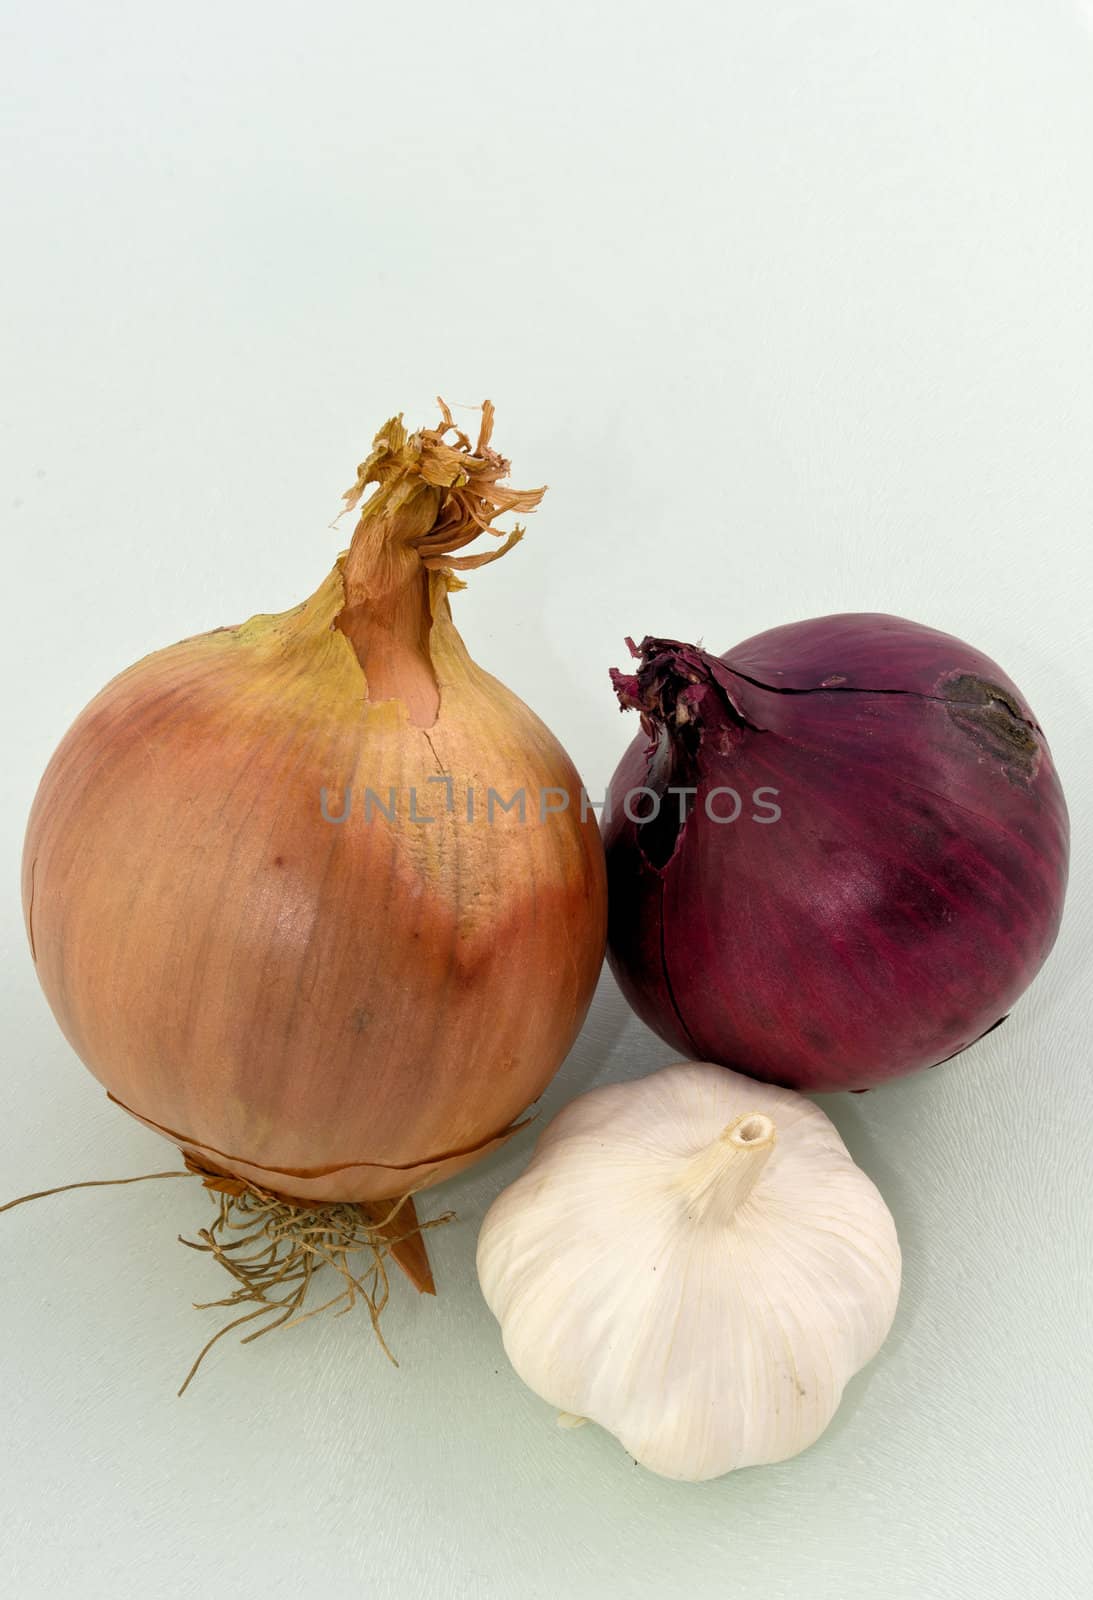 Red onion , gold onion and garlic